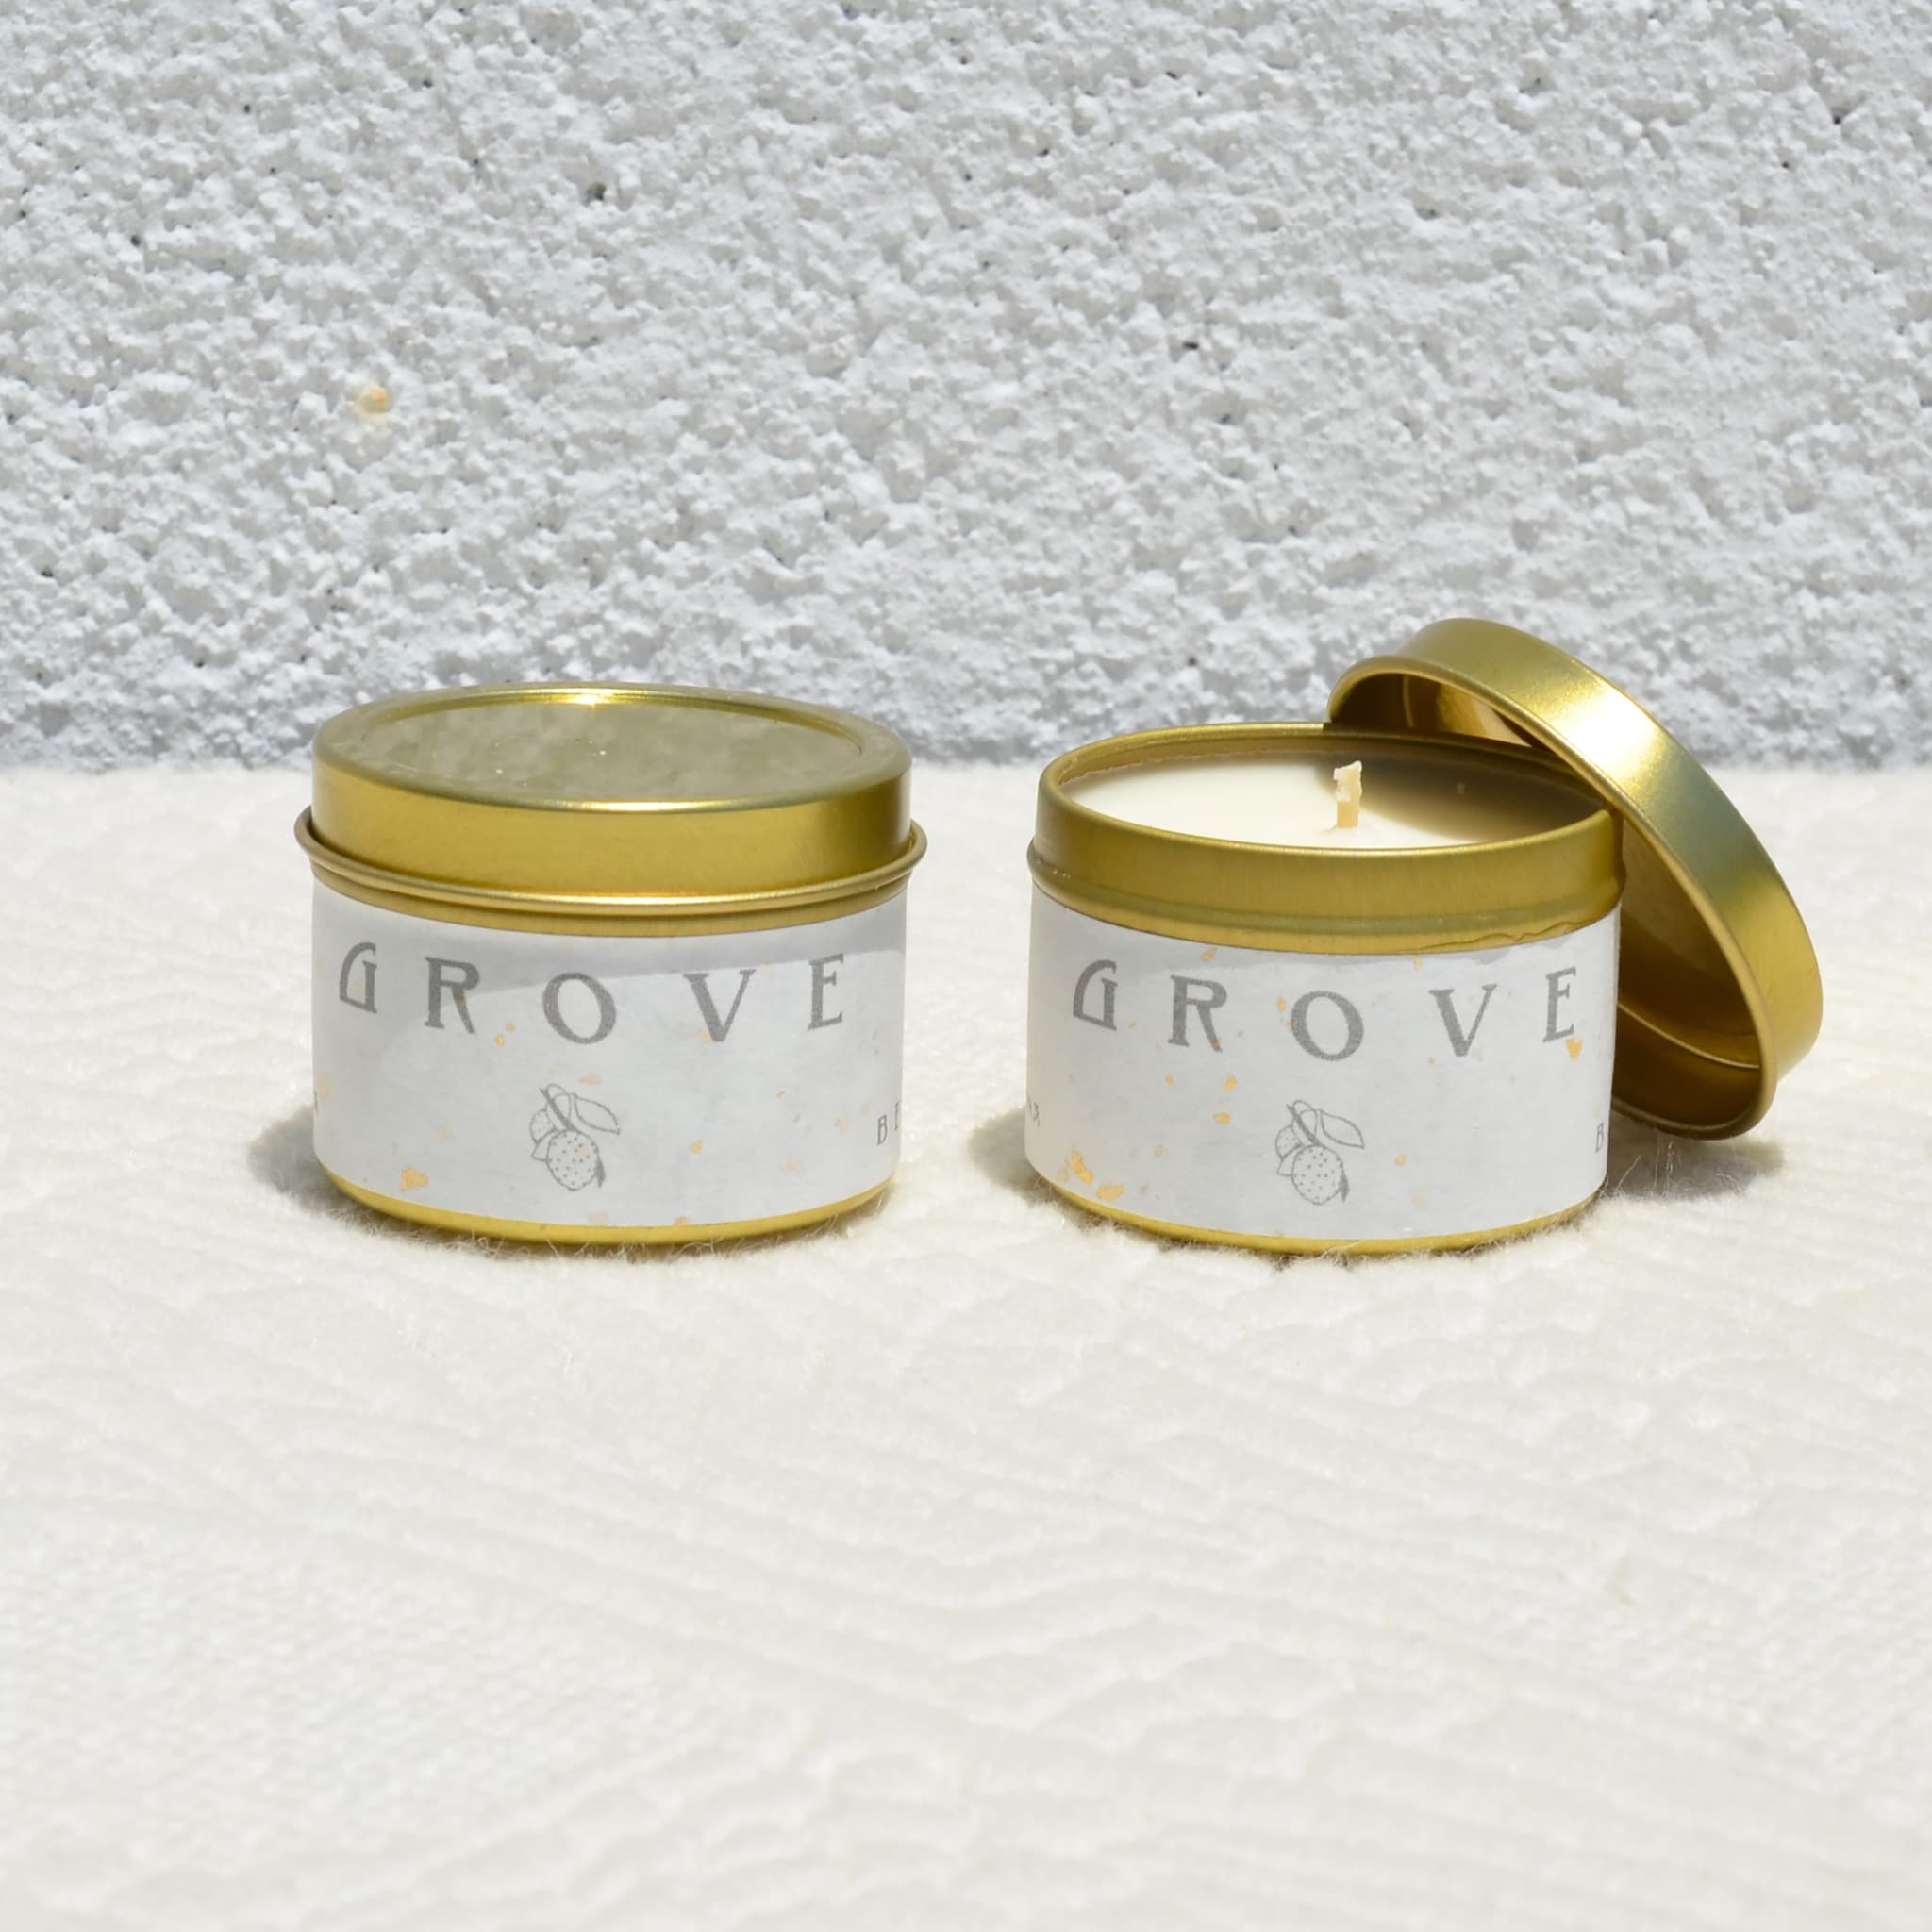 Grove Candle